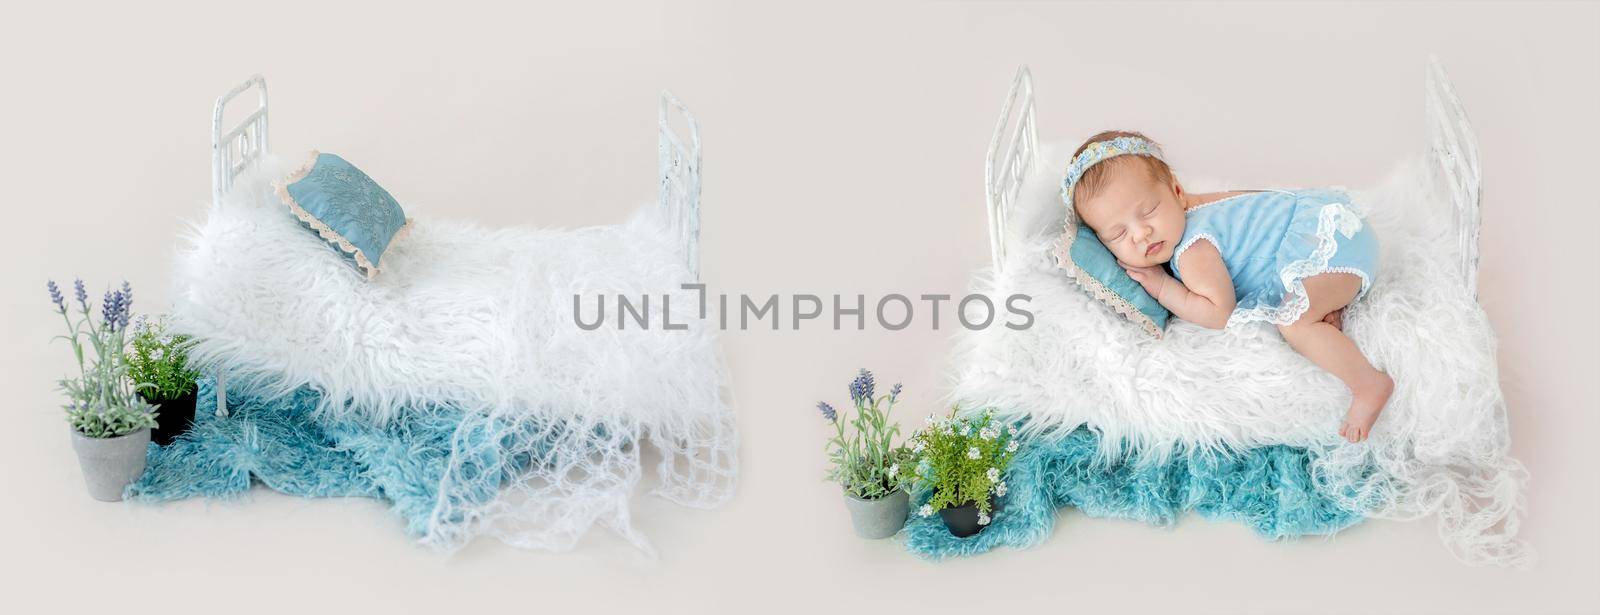 Composition with newborn baby portrait and empty tiny furniture bed fot infant kid photoshoot. Little girl child slleping on soft fur